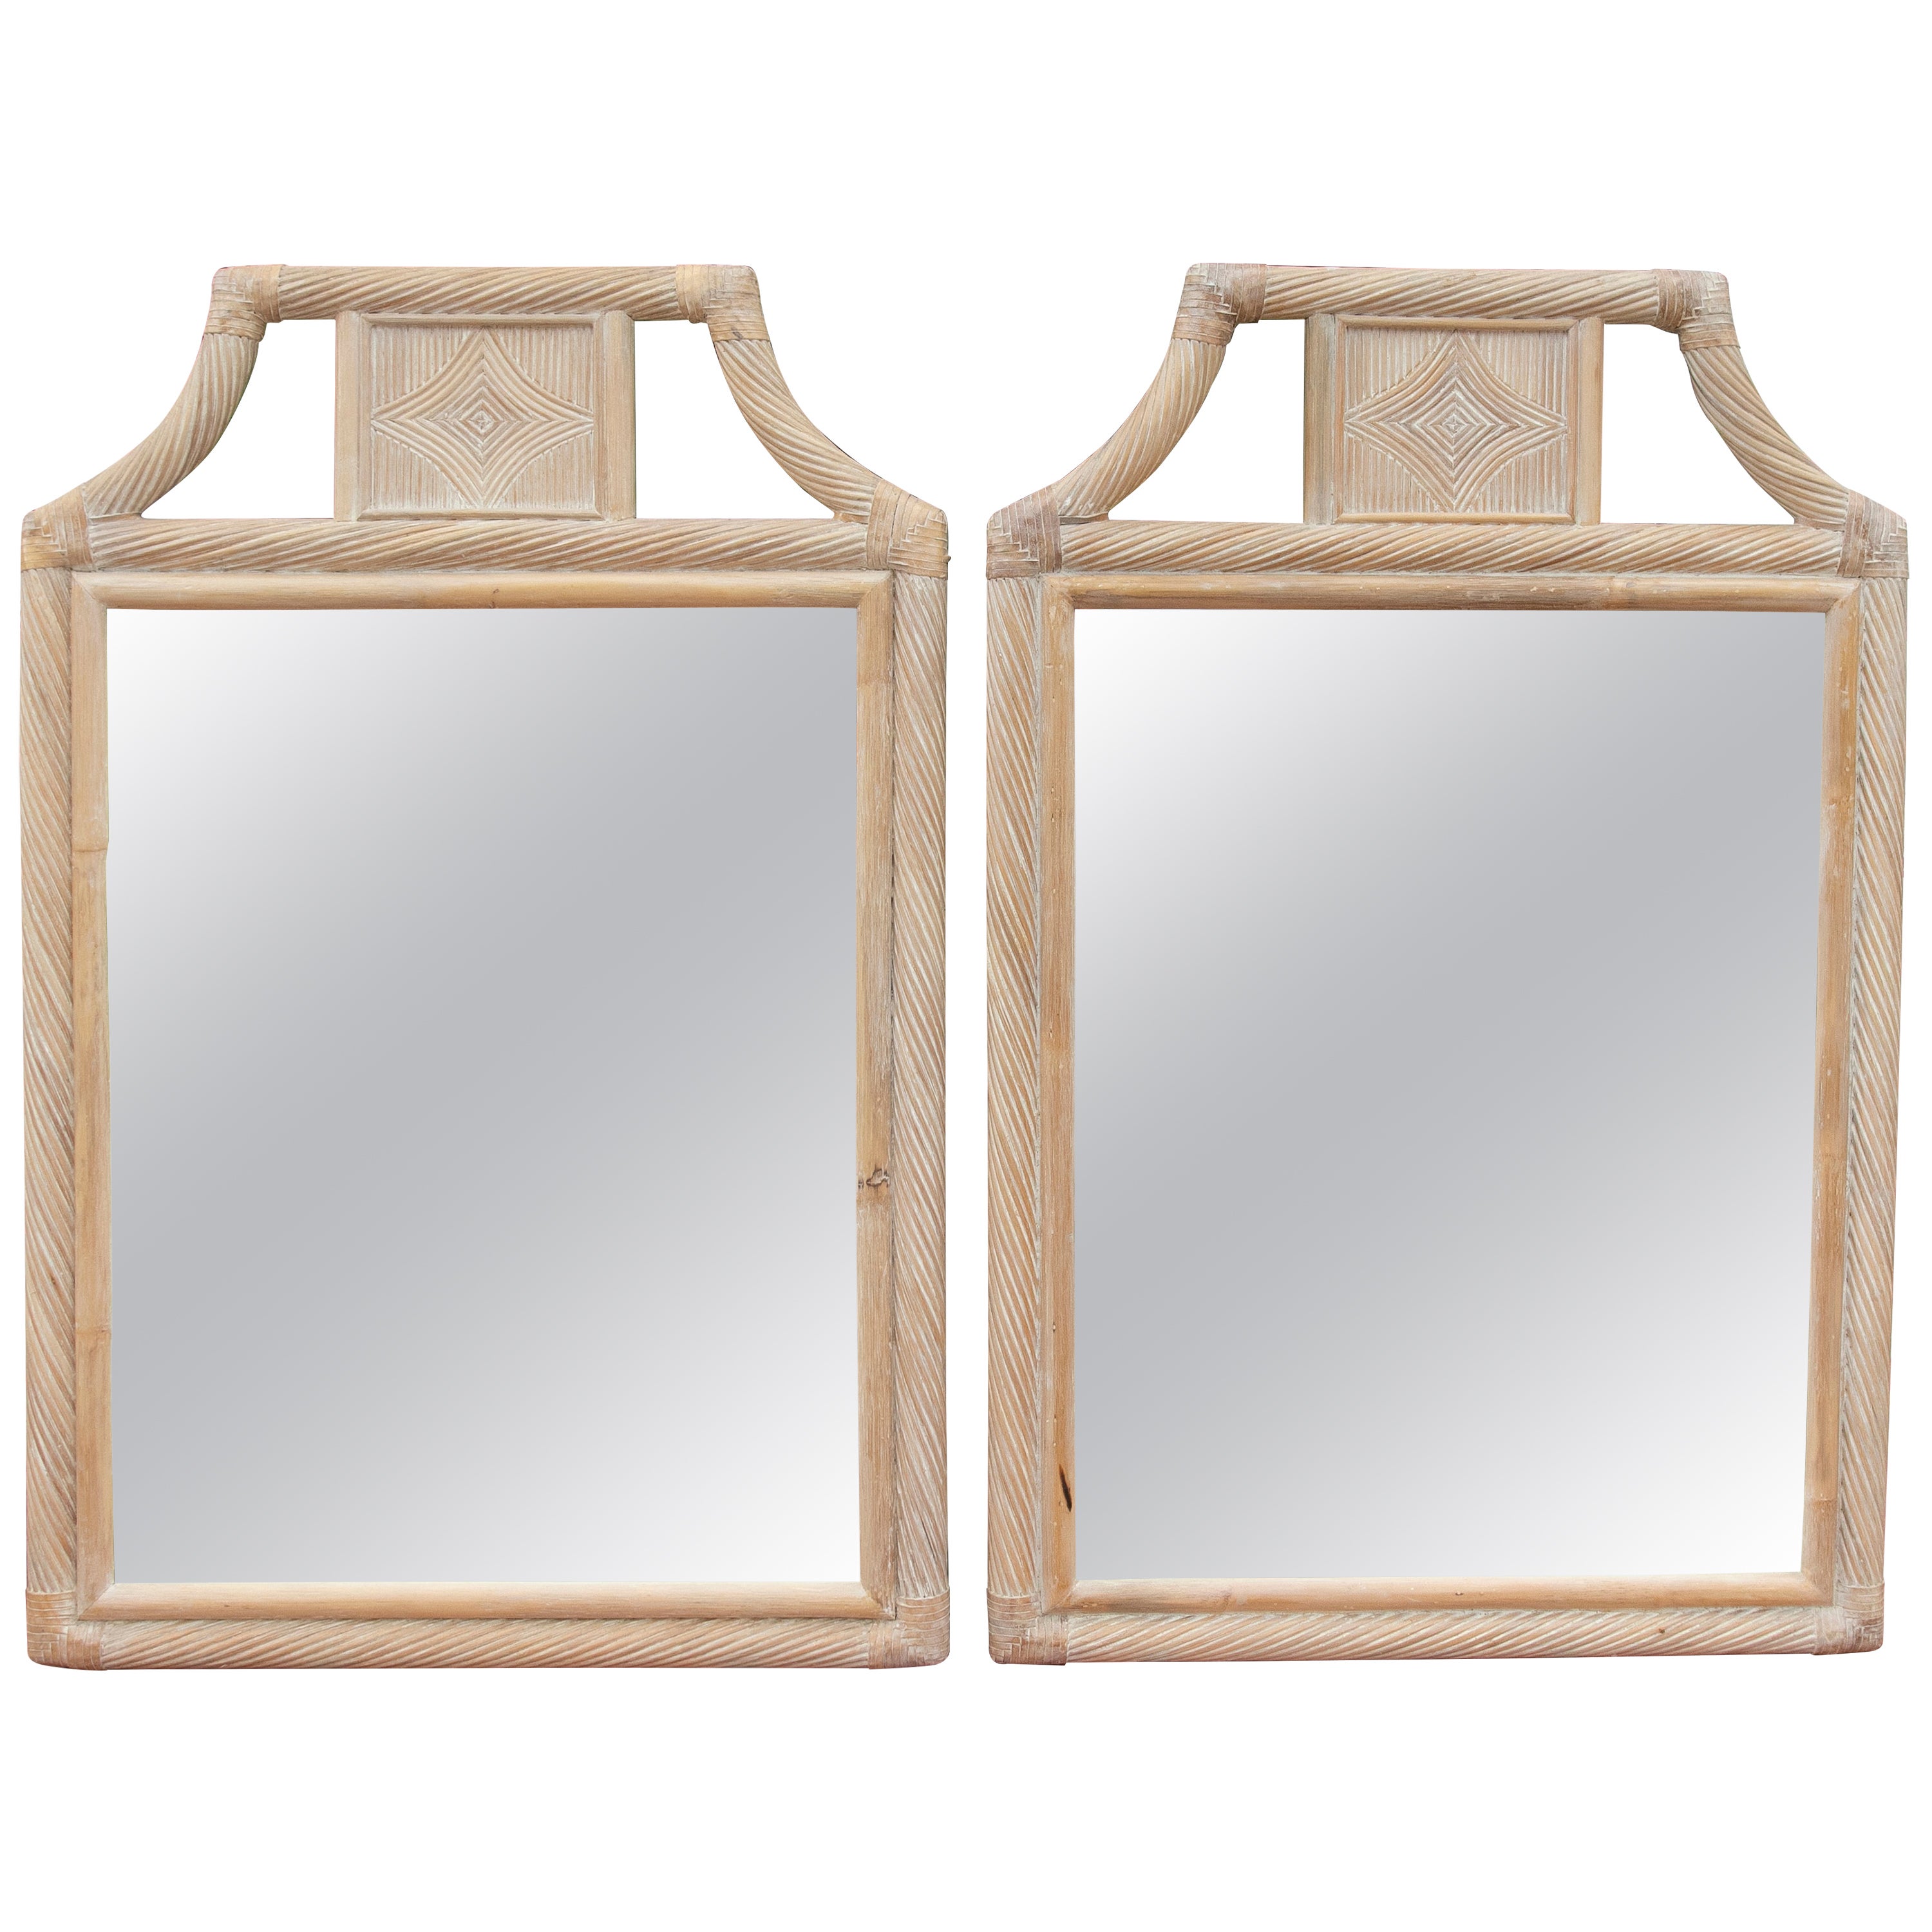 1980s Pair of Wicker Wall Mirrors 